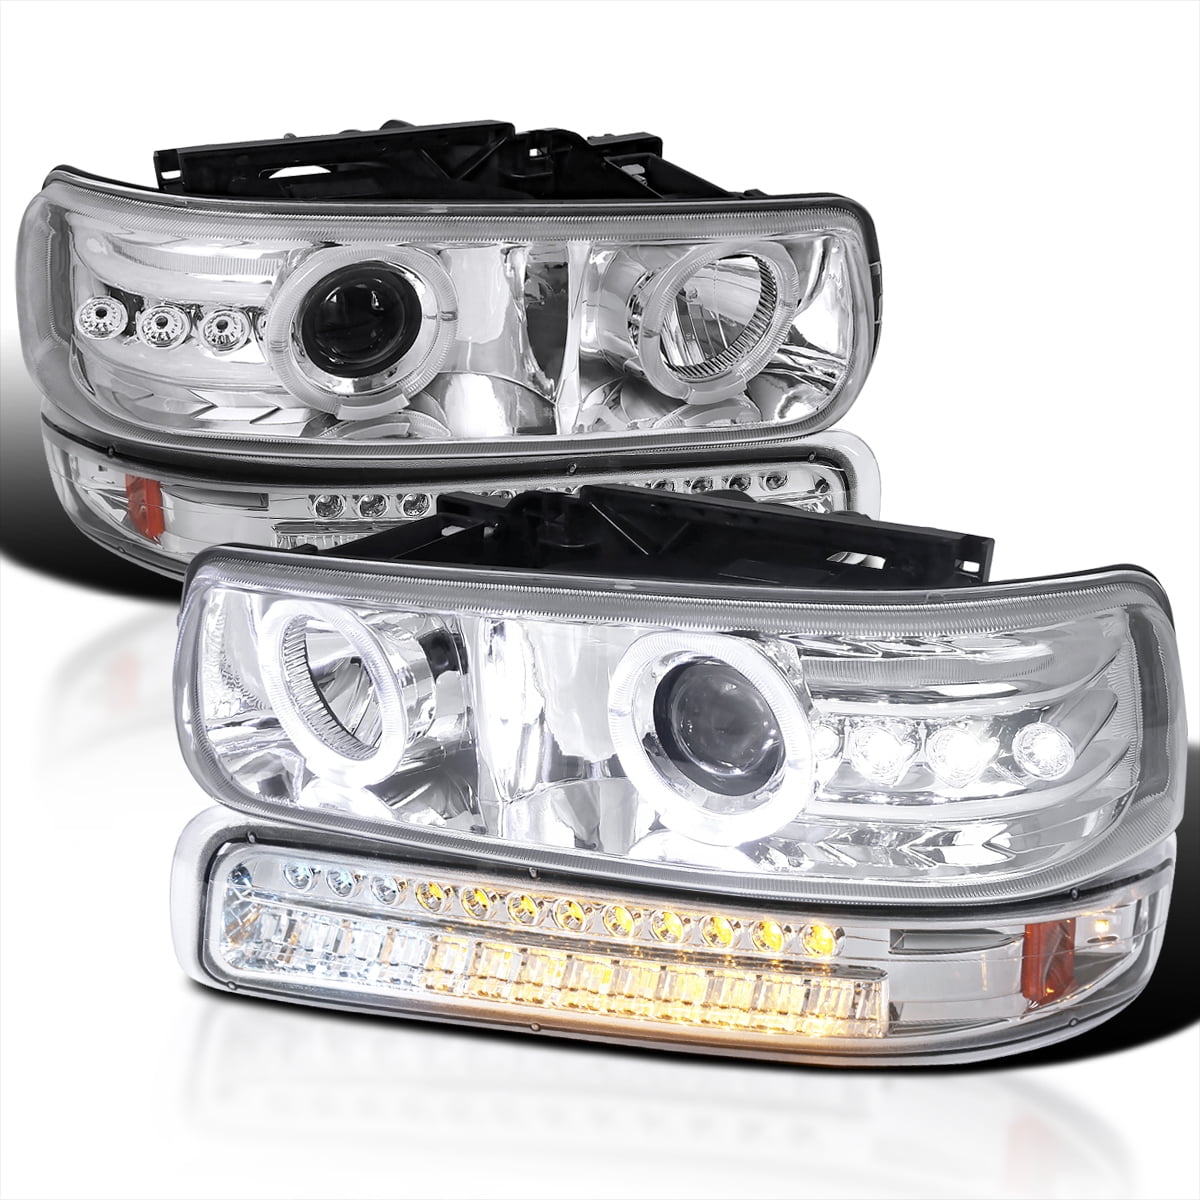 Spec-D Tuning LED Bar Chrome Housing Clear Lens Headlights Bumper Lights 4PC Clear Reflector Compatible with Chevy Silverado 1999-2002 00-06 Tahoe Suburban L+R Pair Assembly 